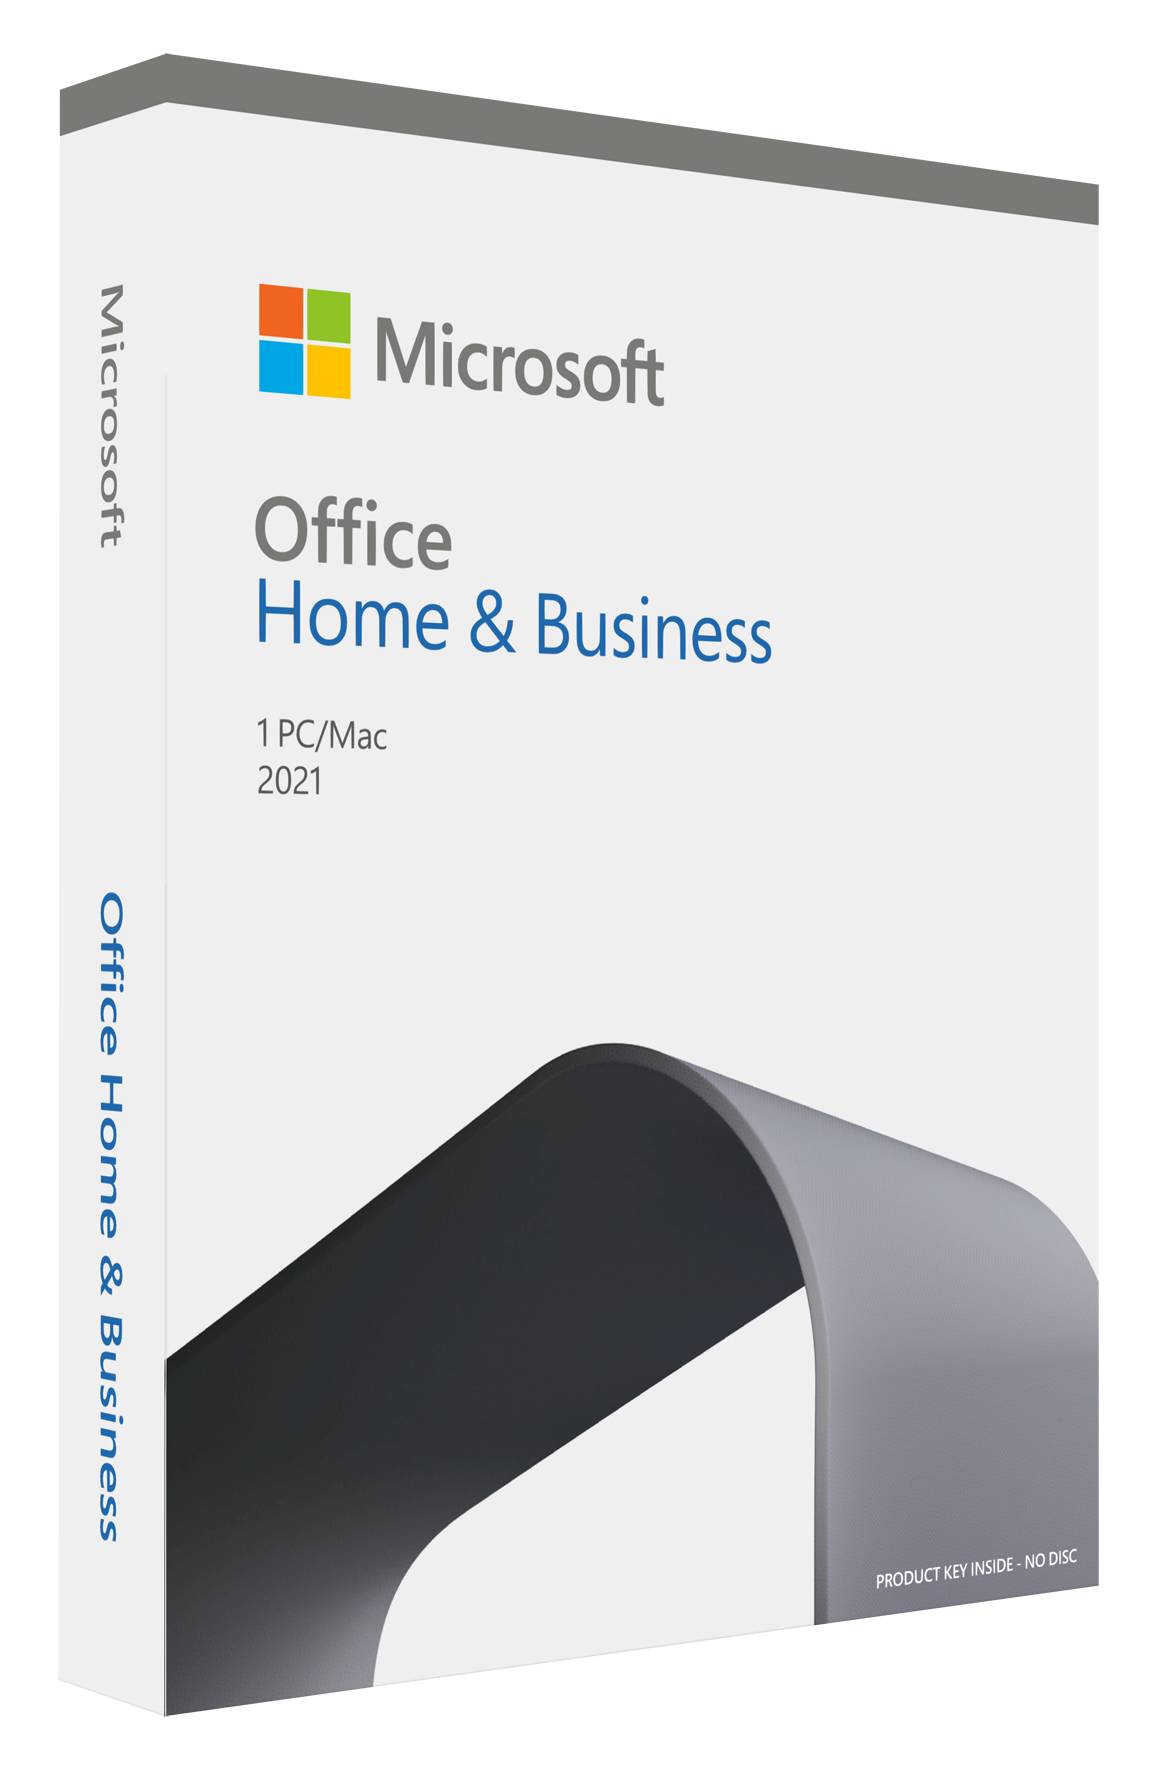 Rca Informatique - Image du produit : OFFICE HOME AND BUSINESS 2021 FRENCH EUROZONE MEDIALESS